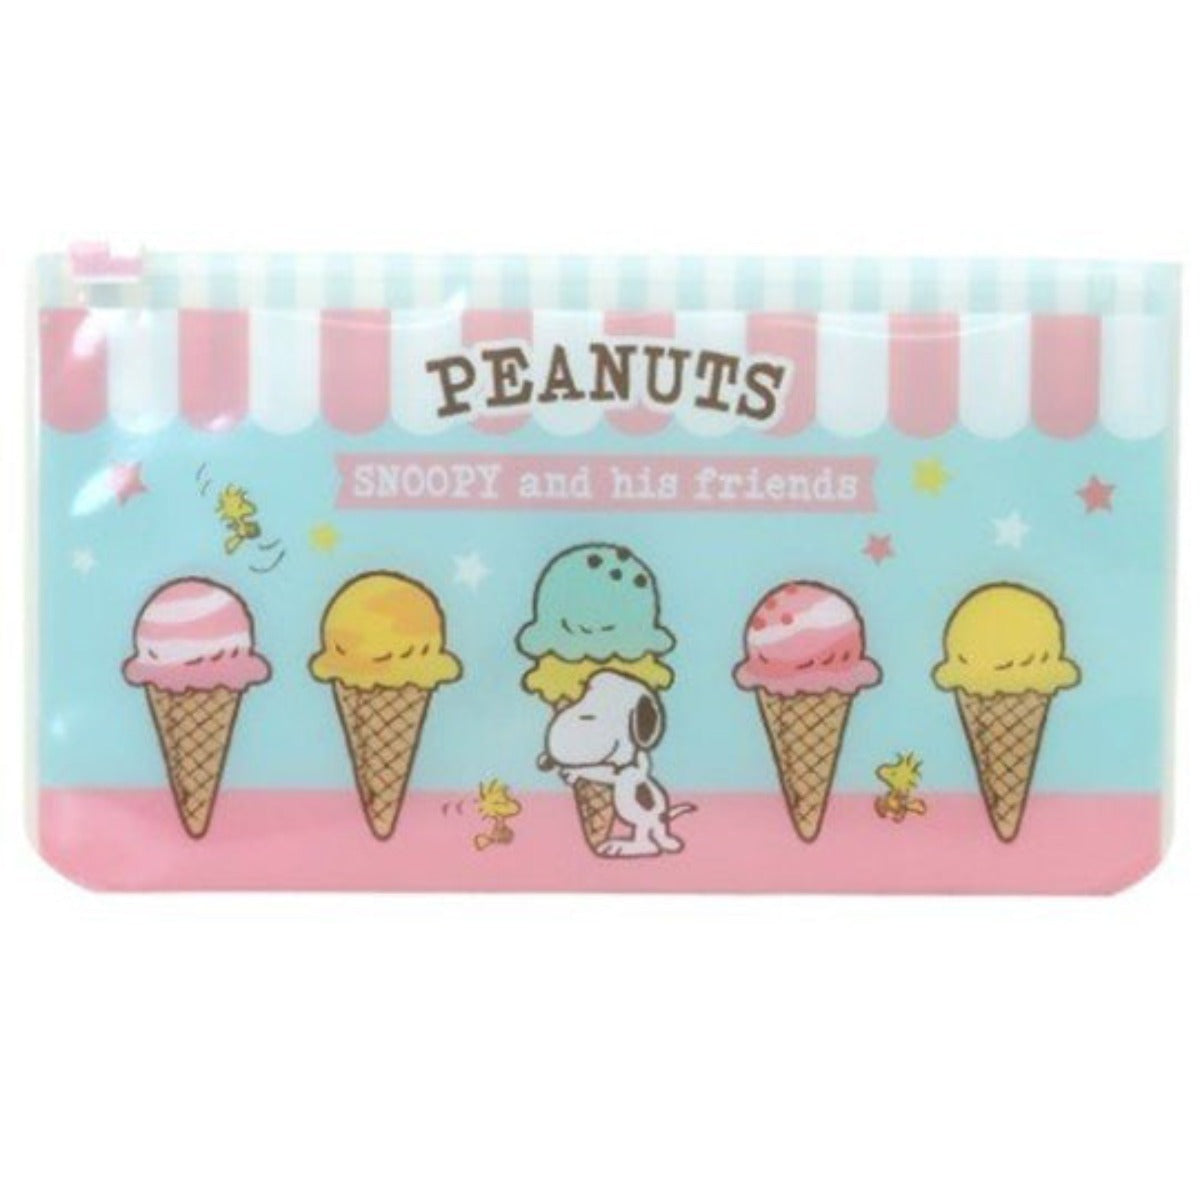 Mask Pouch Flat - Snoopy Ice-cream